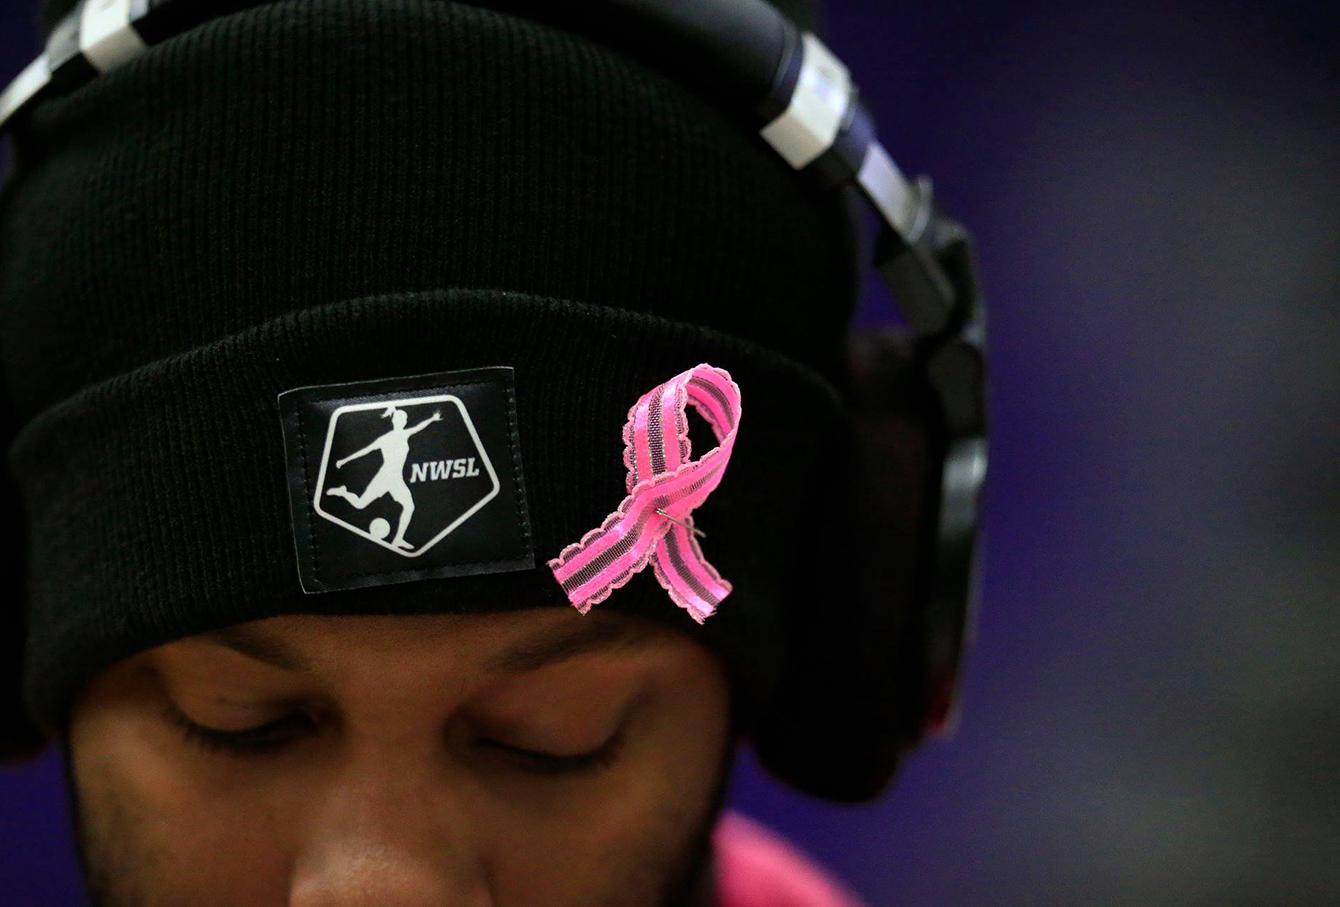 Moore, who was operating a camera for UWW-TV, wears a pink ribbon for breast cancer awareness as the UW-Whitewater women's basketball team defeated UW-Eau Claire 68-55 on Saturday, Feb. 2, 2019, at Kachel Gym.